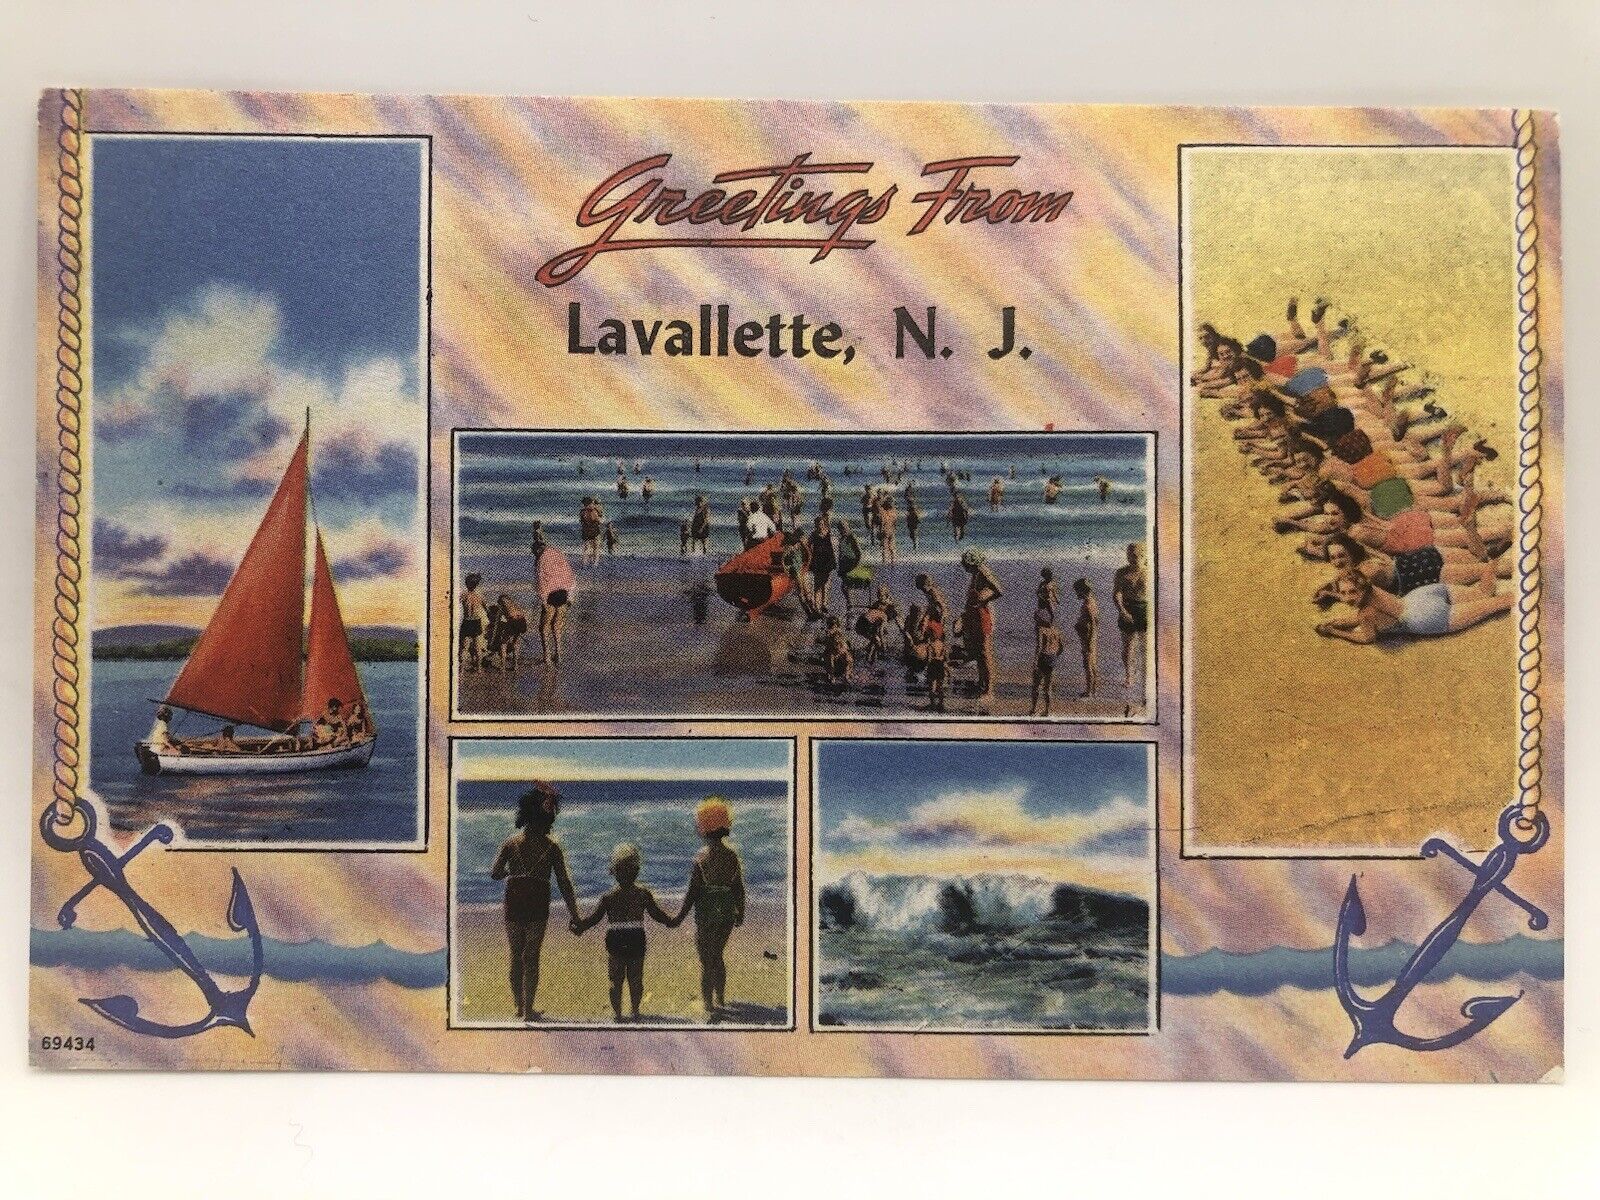 Postcard Greetings from Lavallette New Jersey 1957